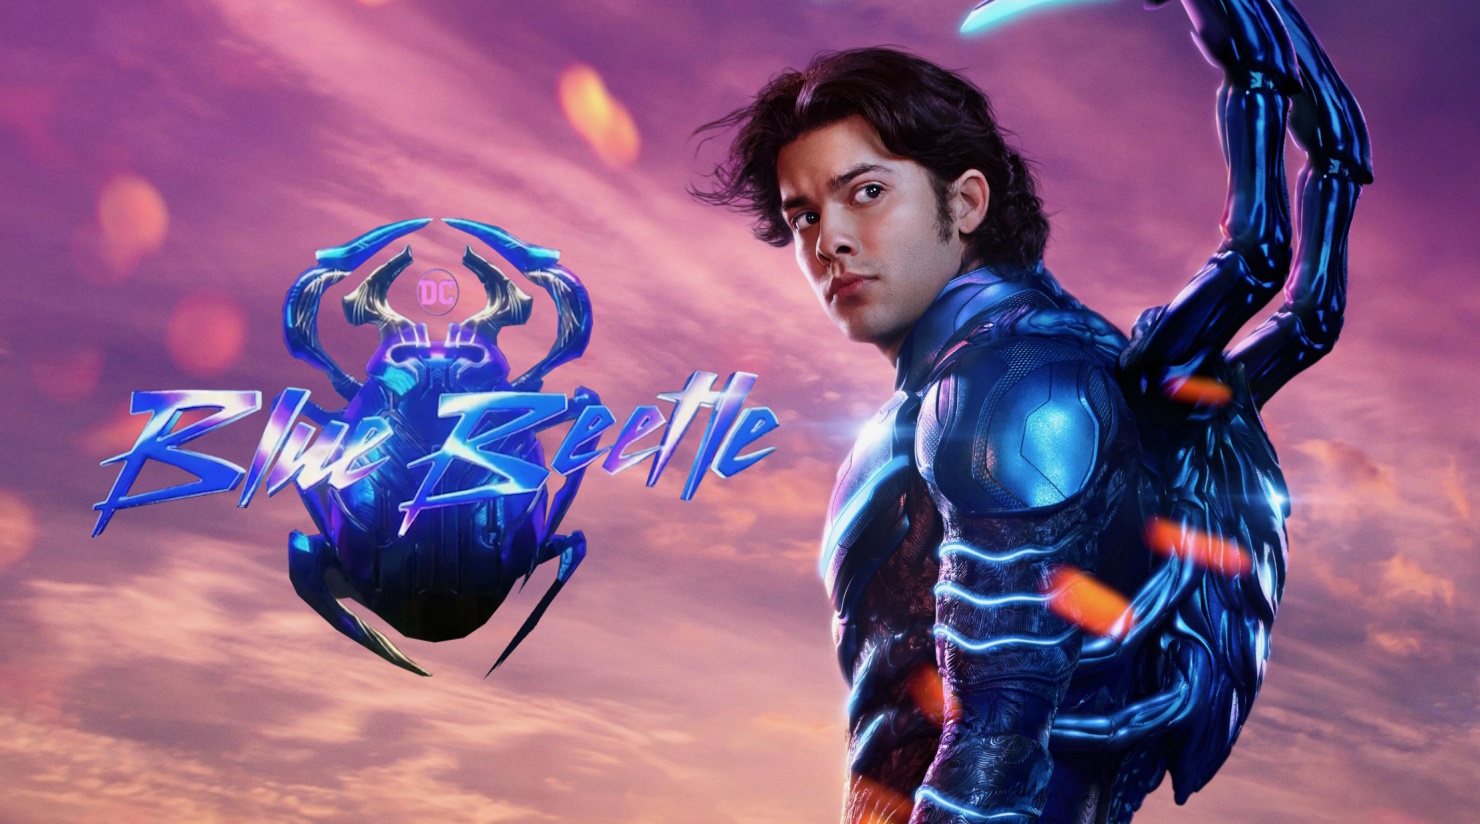 Blue Beetle Review: Good For the Culture, But An Average Movie